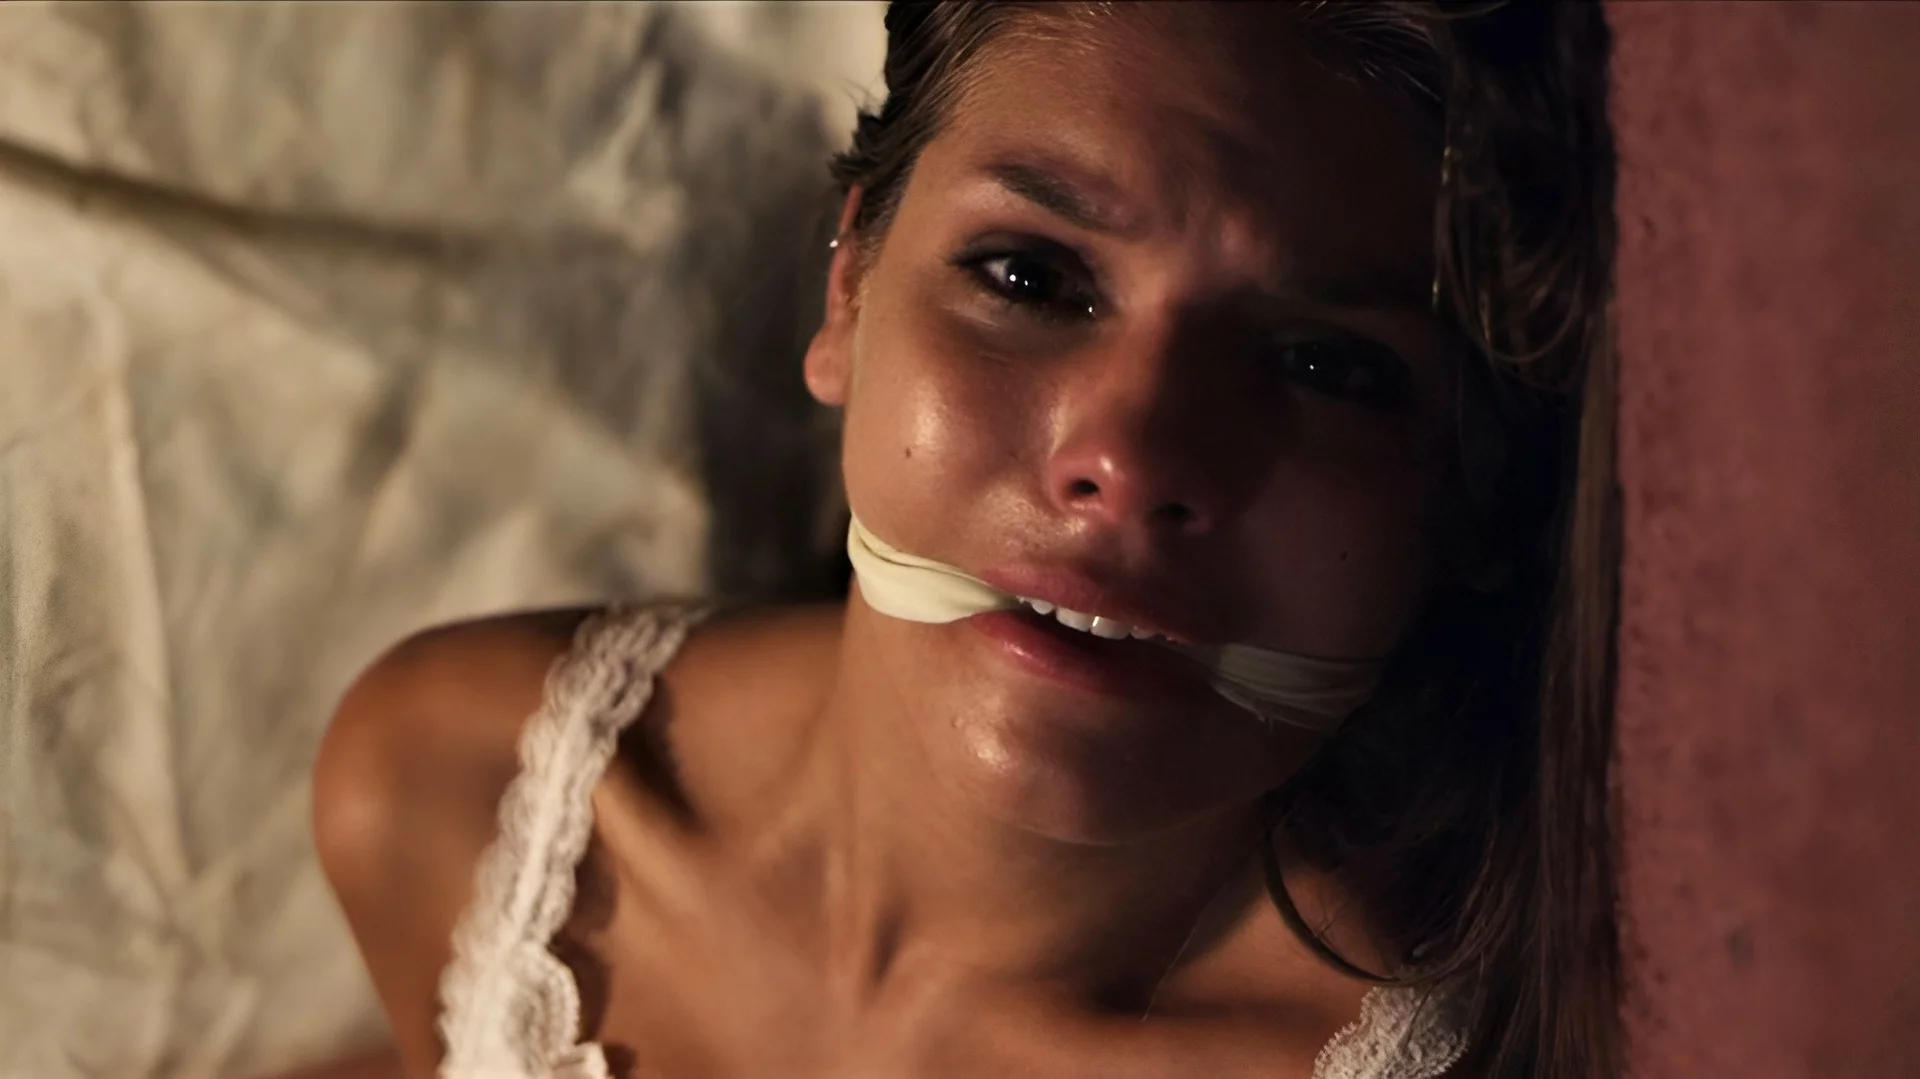 BoundHub - Caitlin Stasey & Two Other Actresses - Movie Bondage